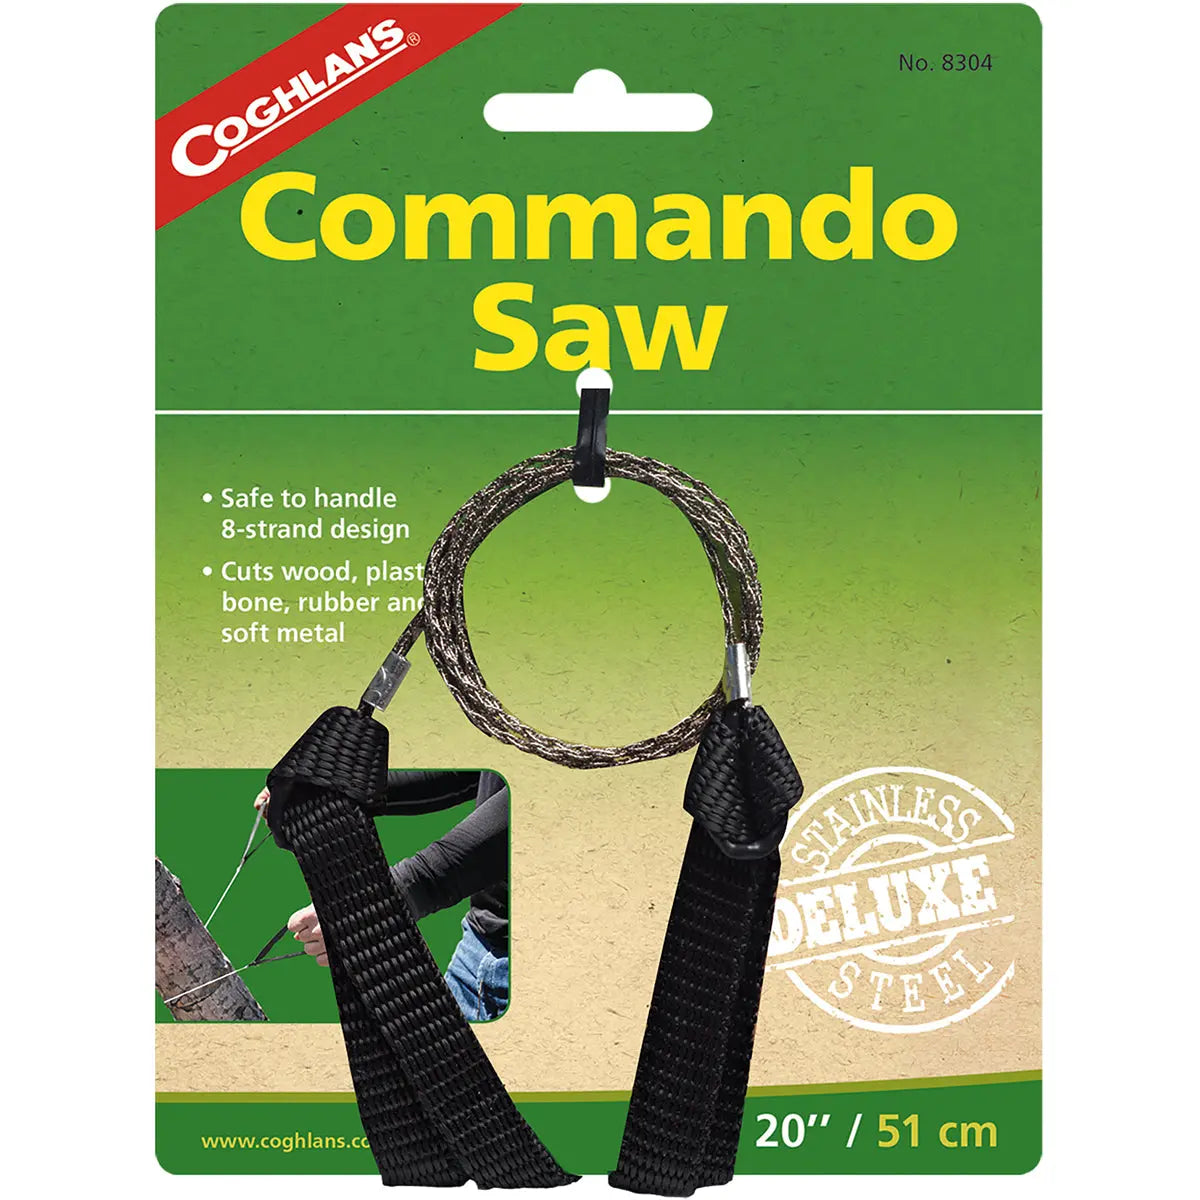 Coghlan's Commando Saw, 20" Wire Cutting Surface, Cuts Wood and Other Material Coghlan's